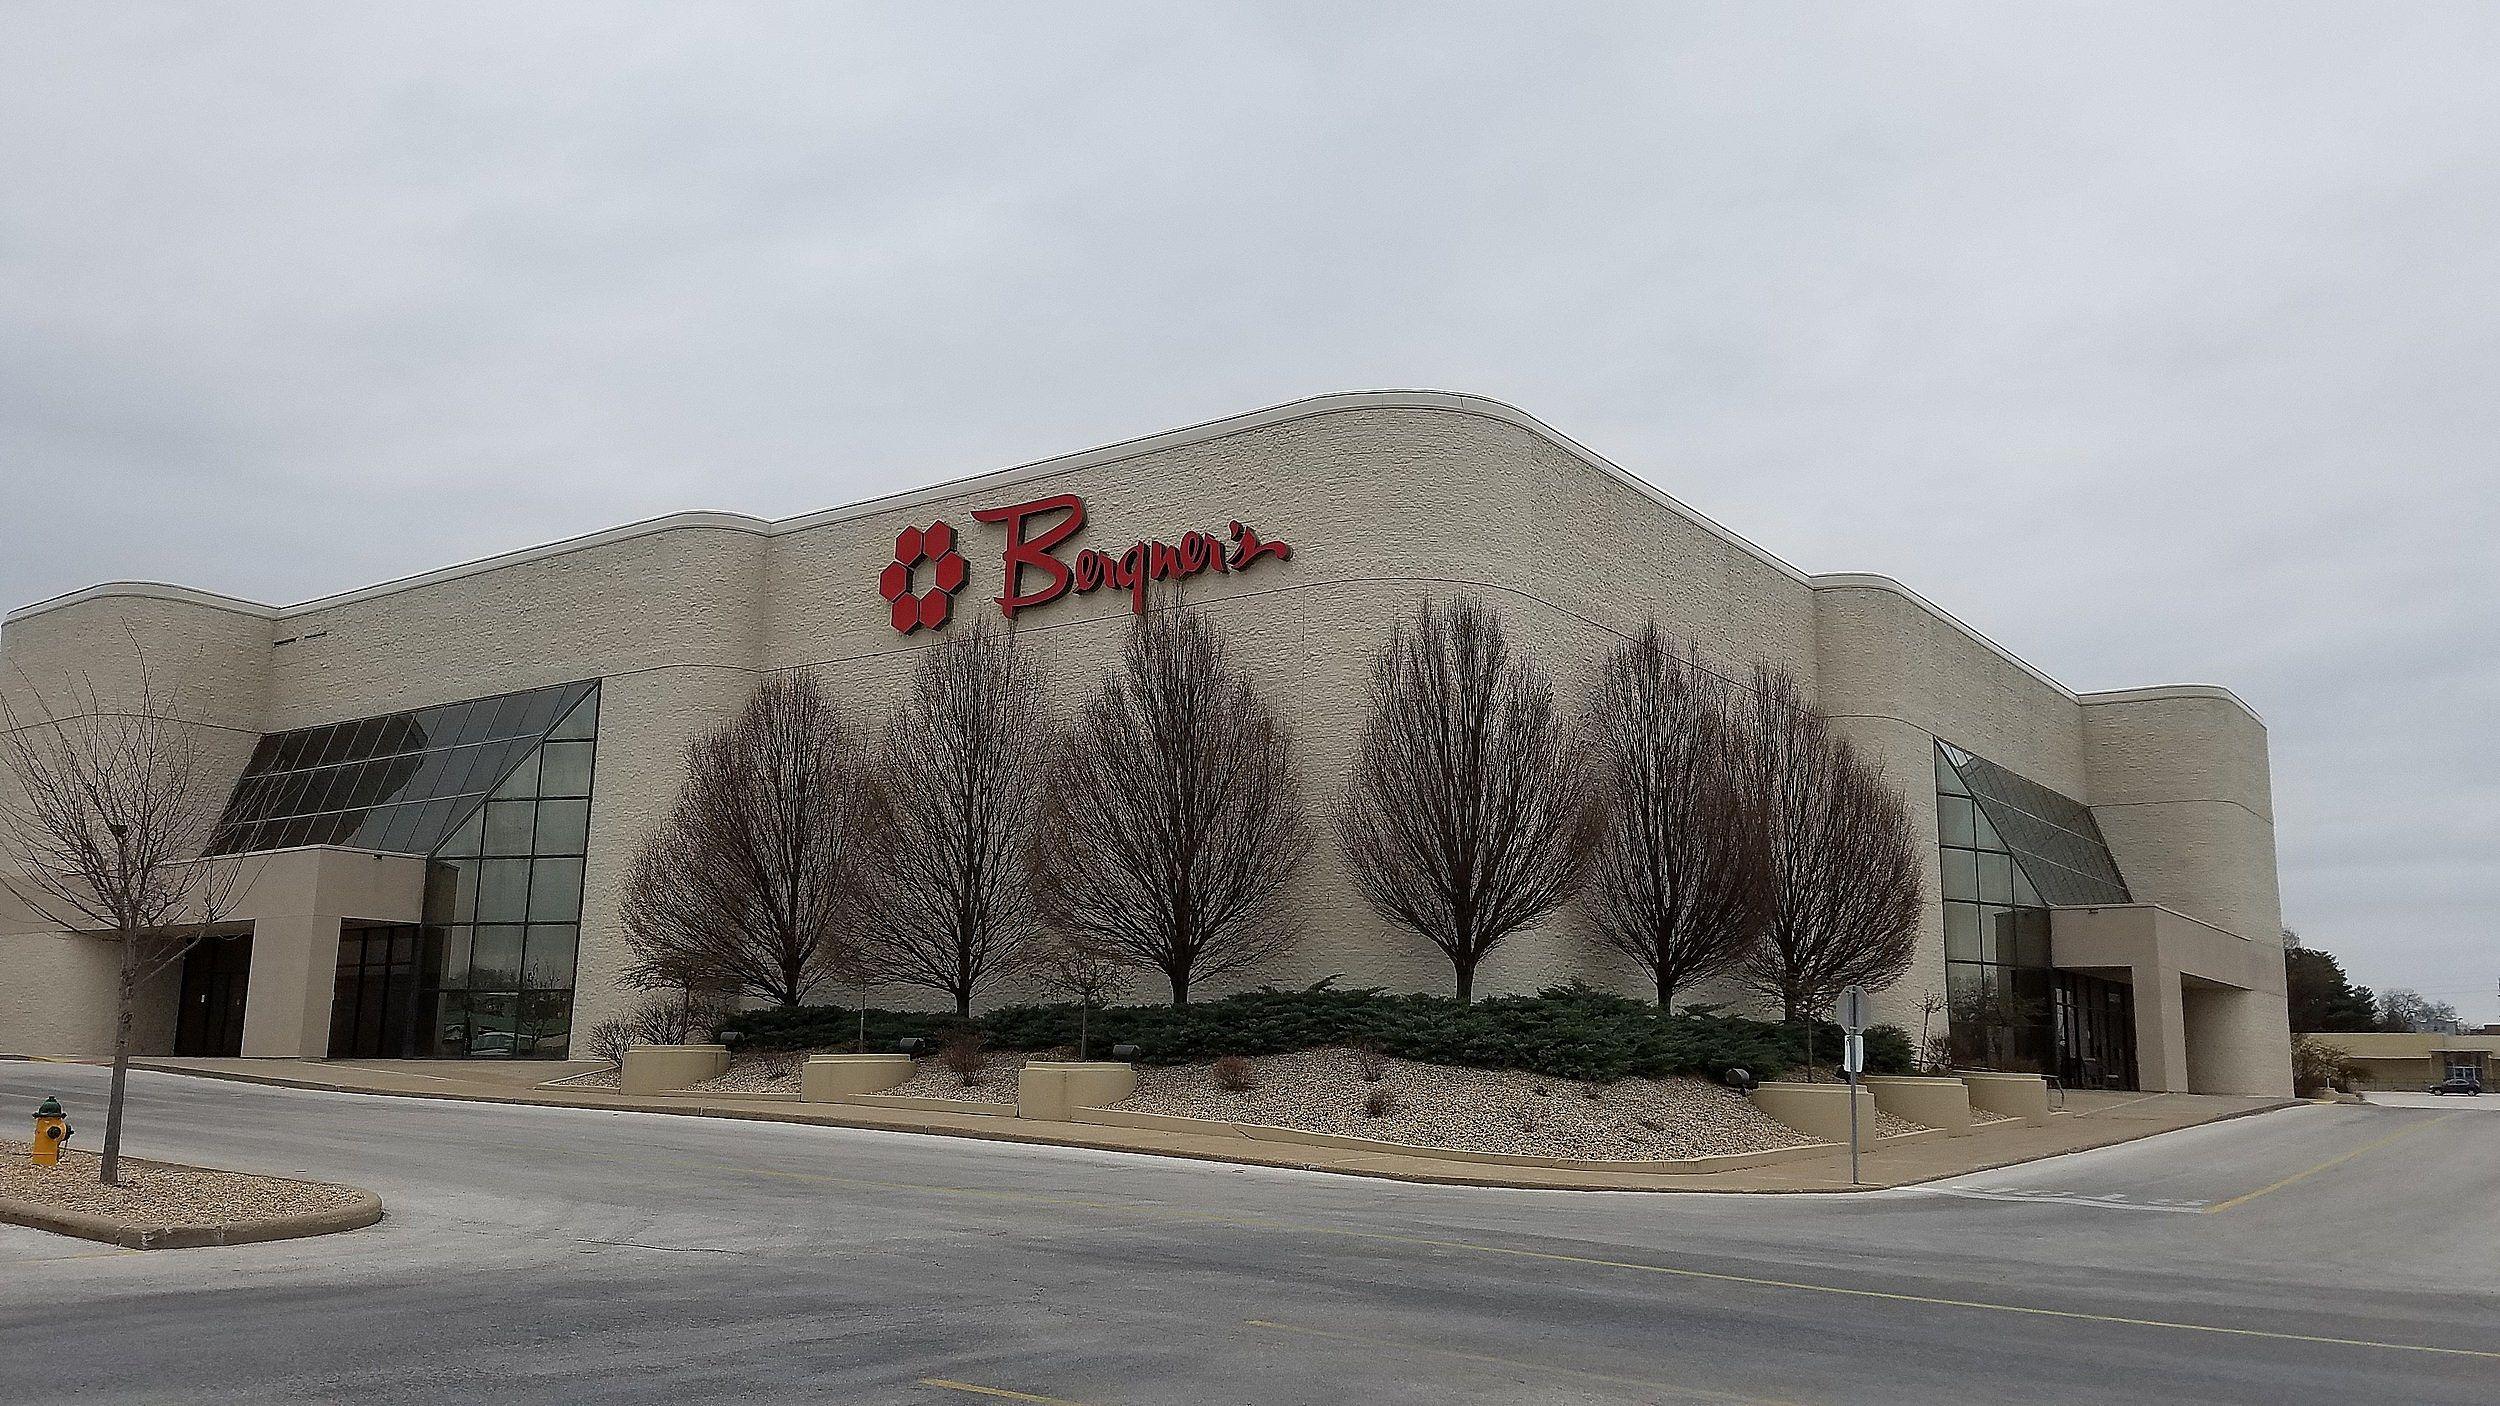 Bergner's Logo - Bergner's to Officially End 40 Years in Business in Quincy